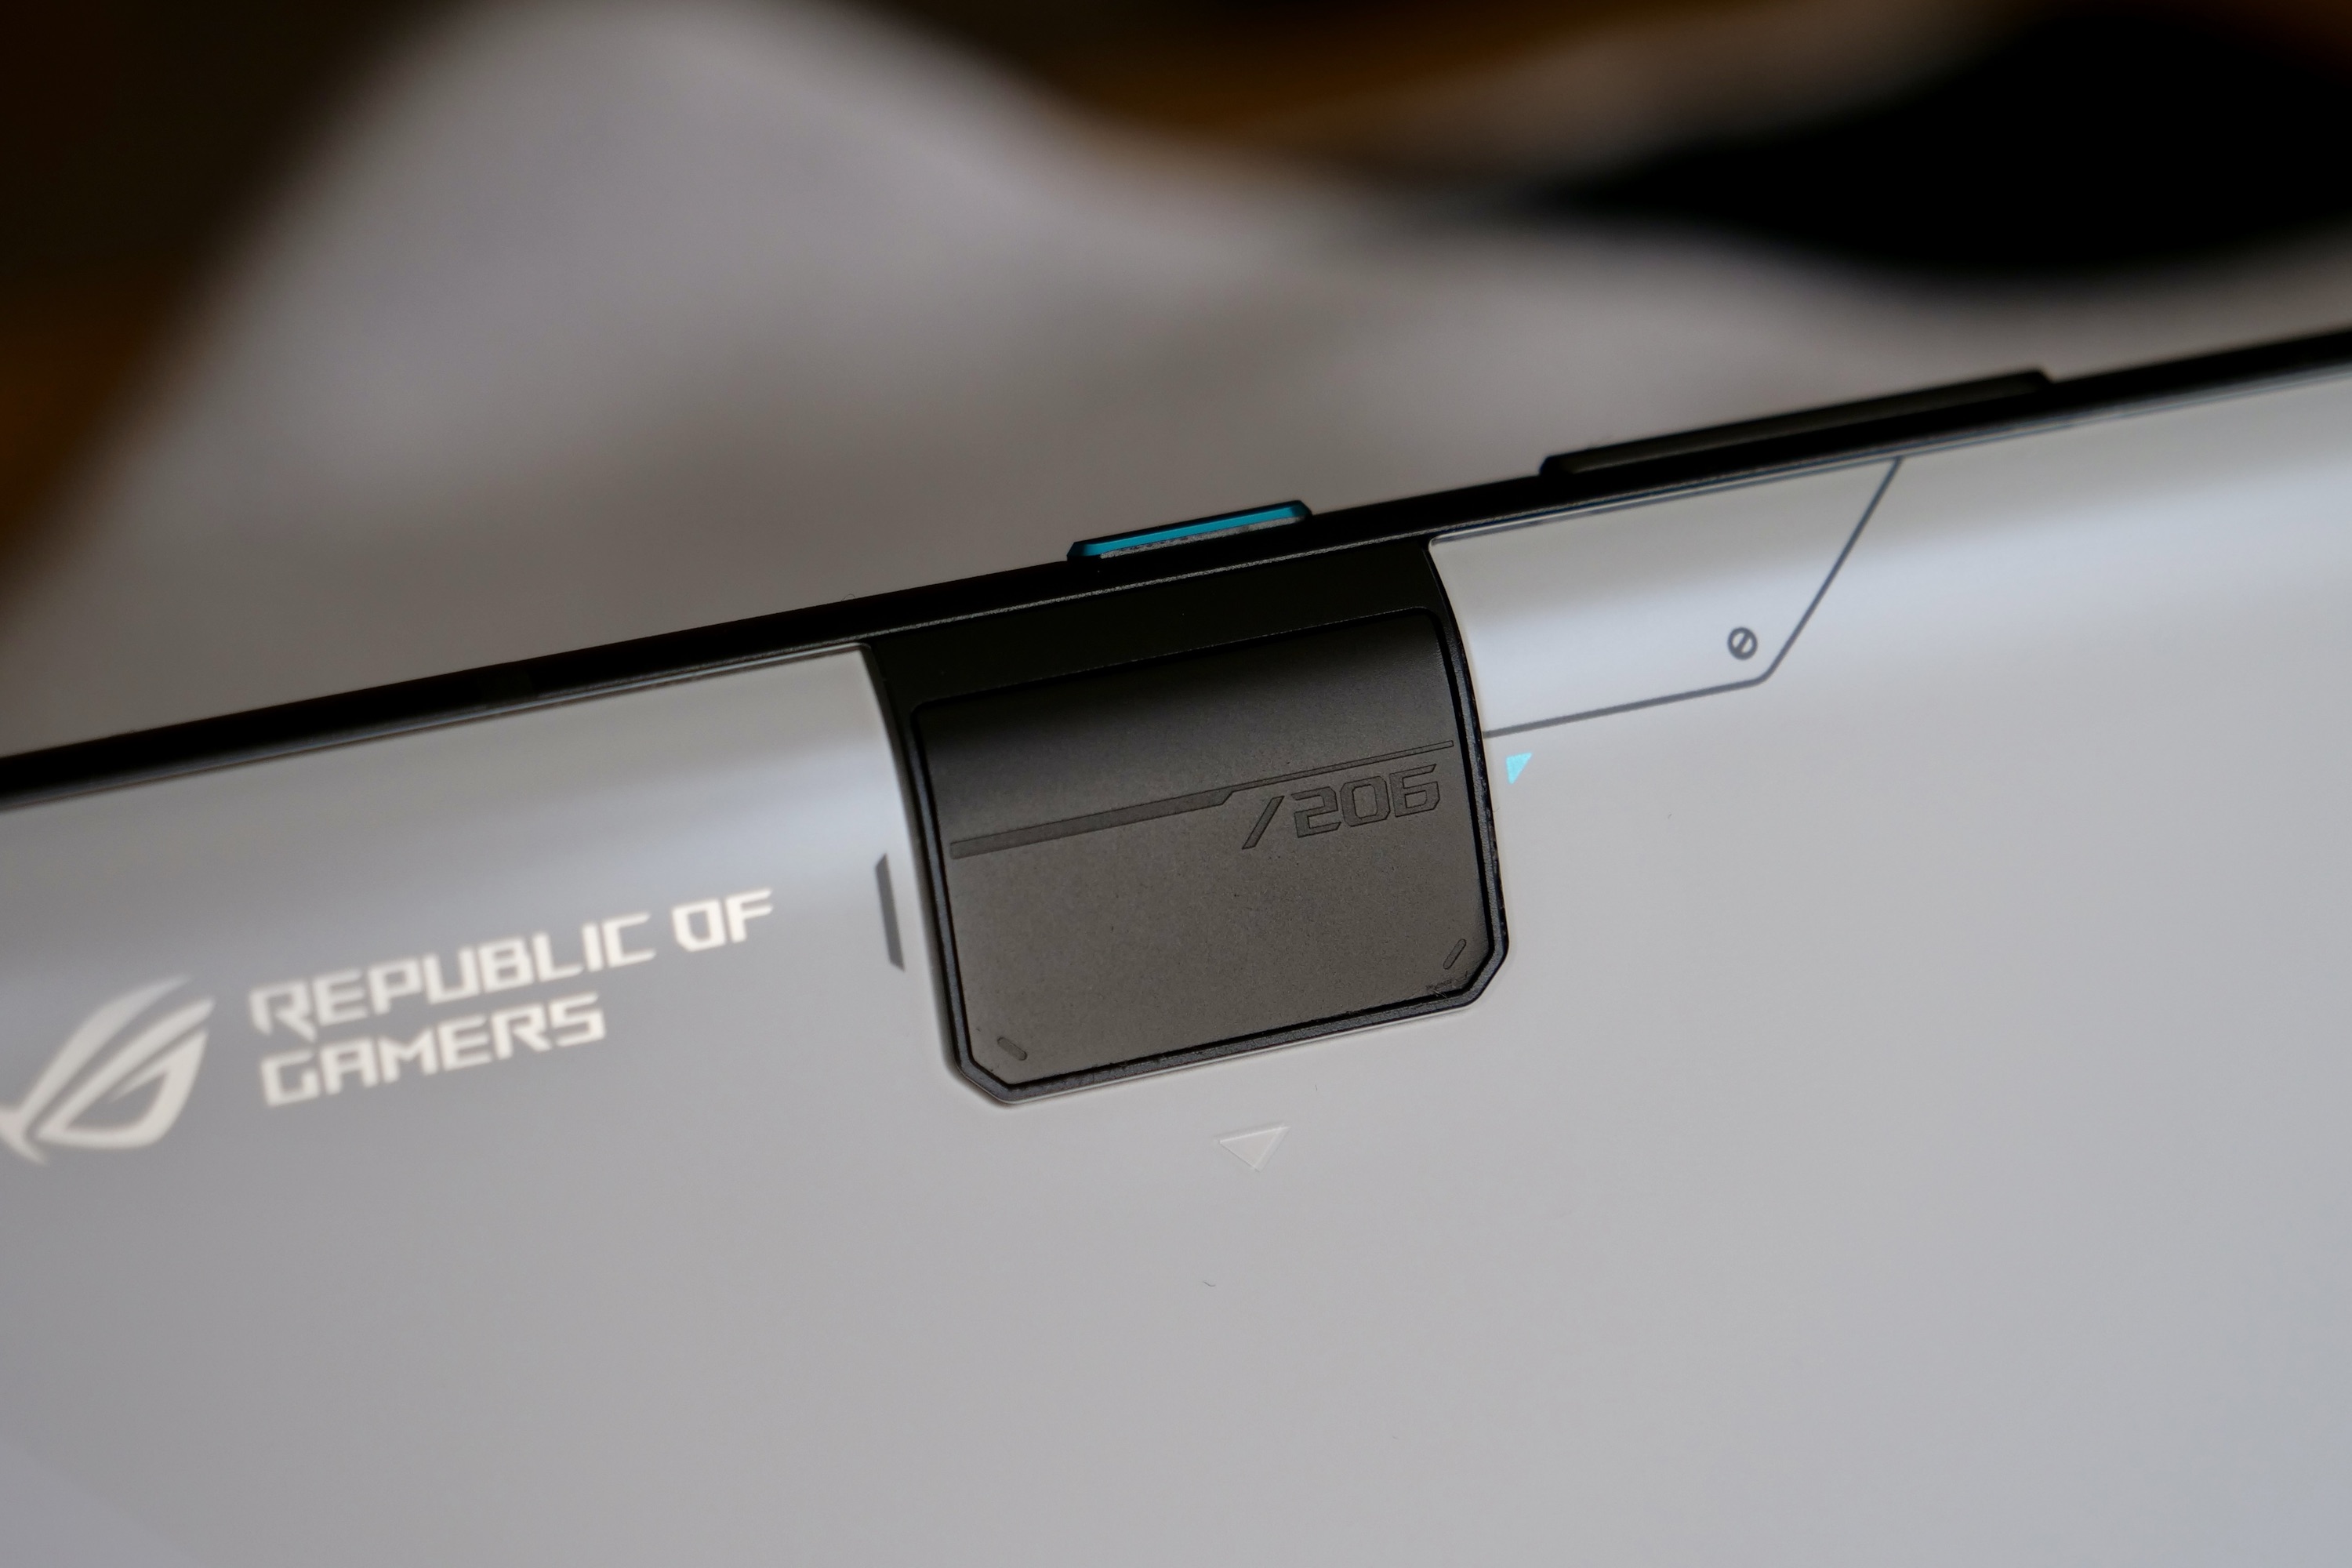 The closed AeroActive Port on the Asus ROG Phone 7 Ultimate.